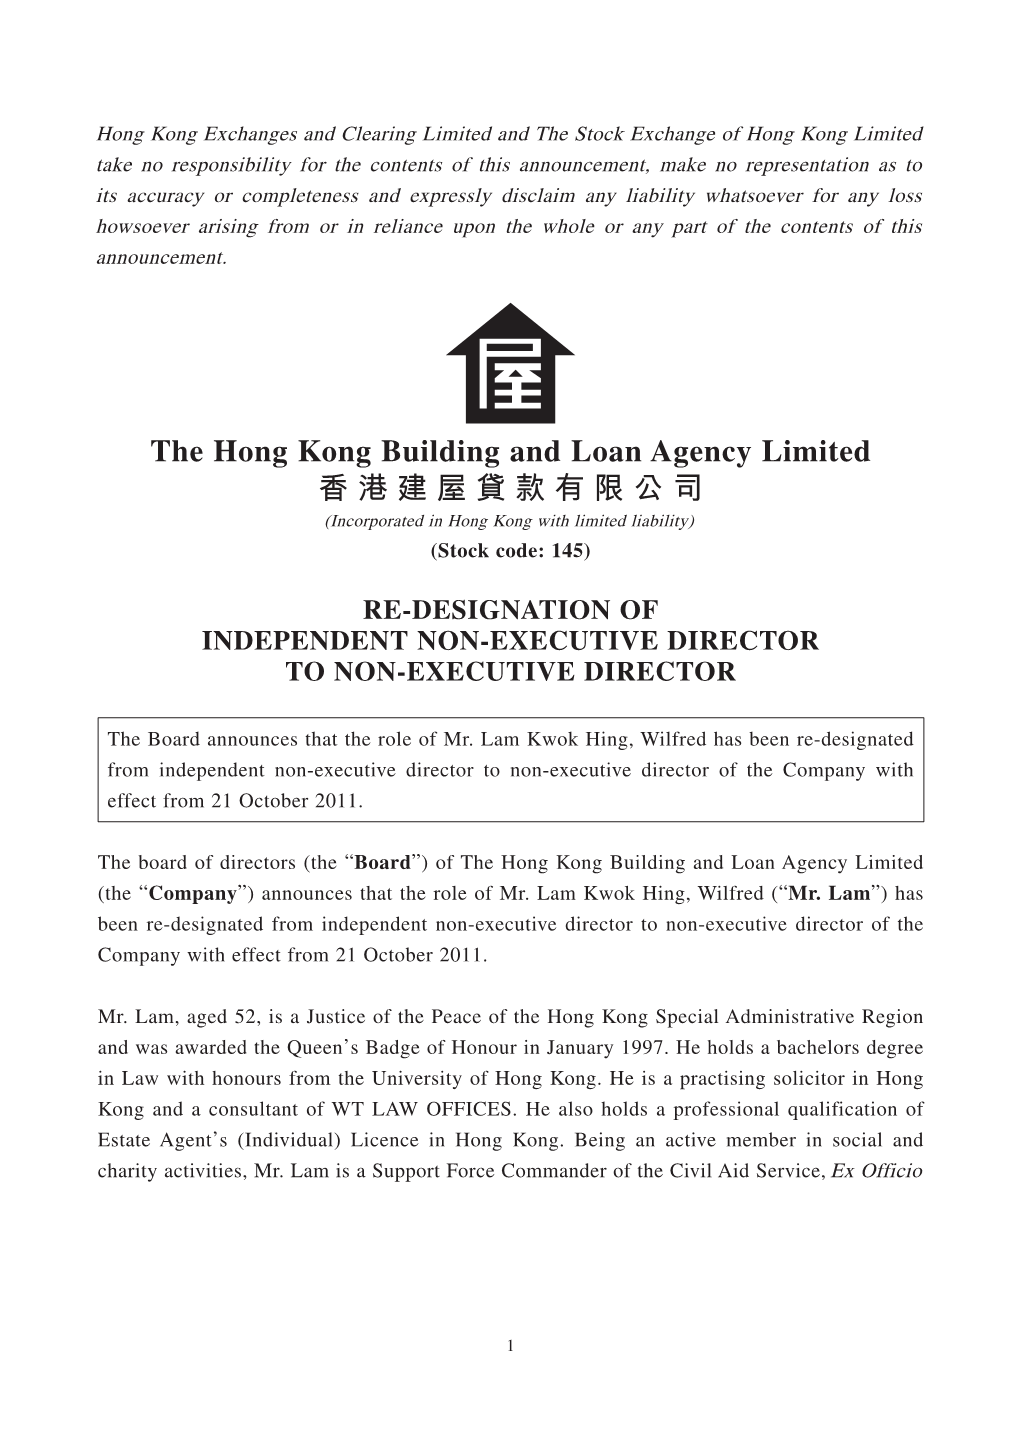 The Hong Kong Building and Loan Agency Limited 香港建屋貸款有限公司 (Incorporated in Hong Kong with Limited Liability) (Stock Code: 145)